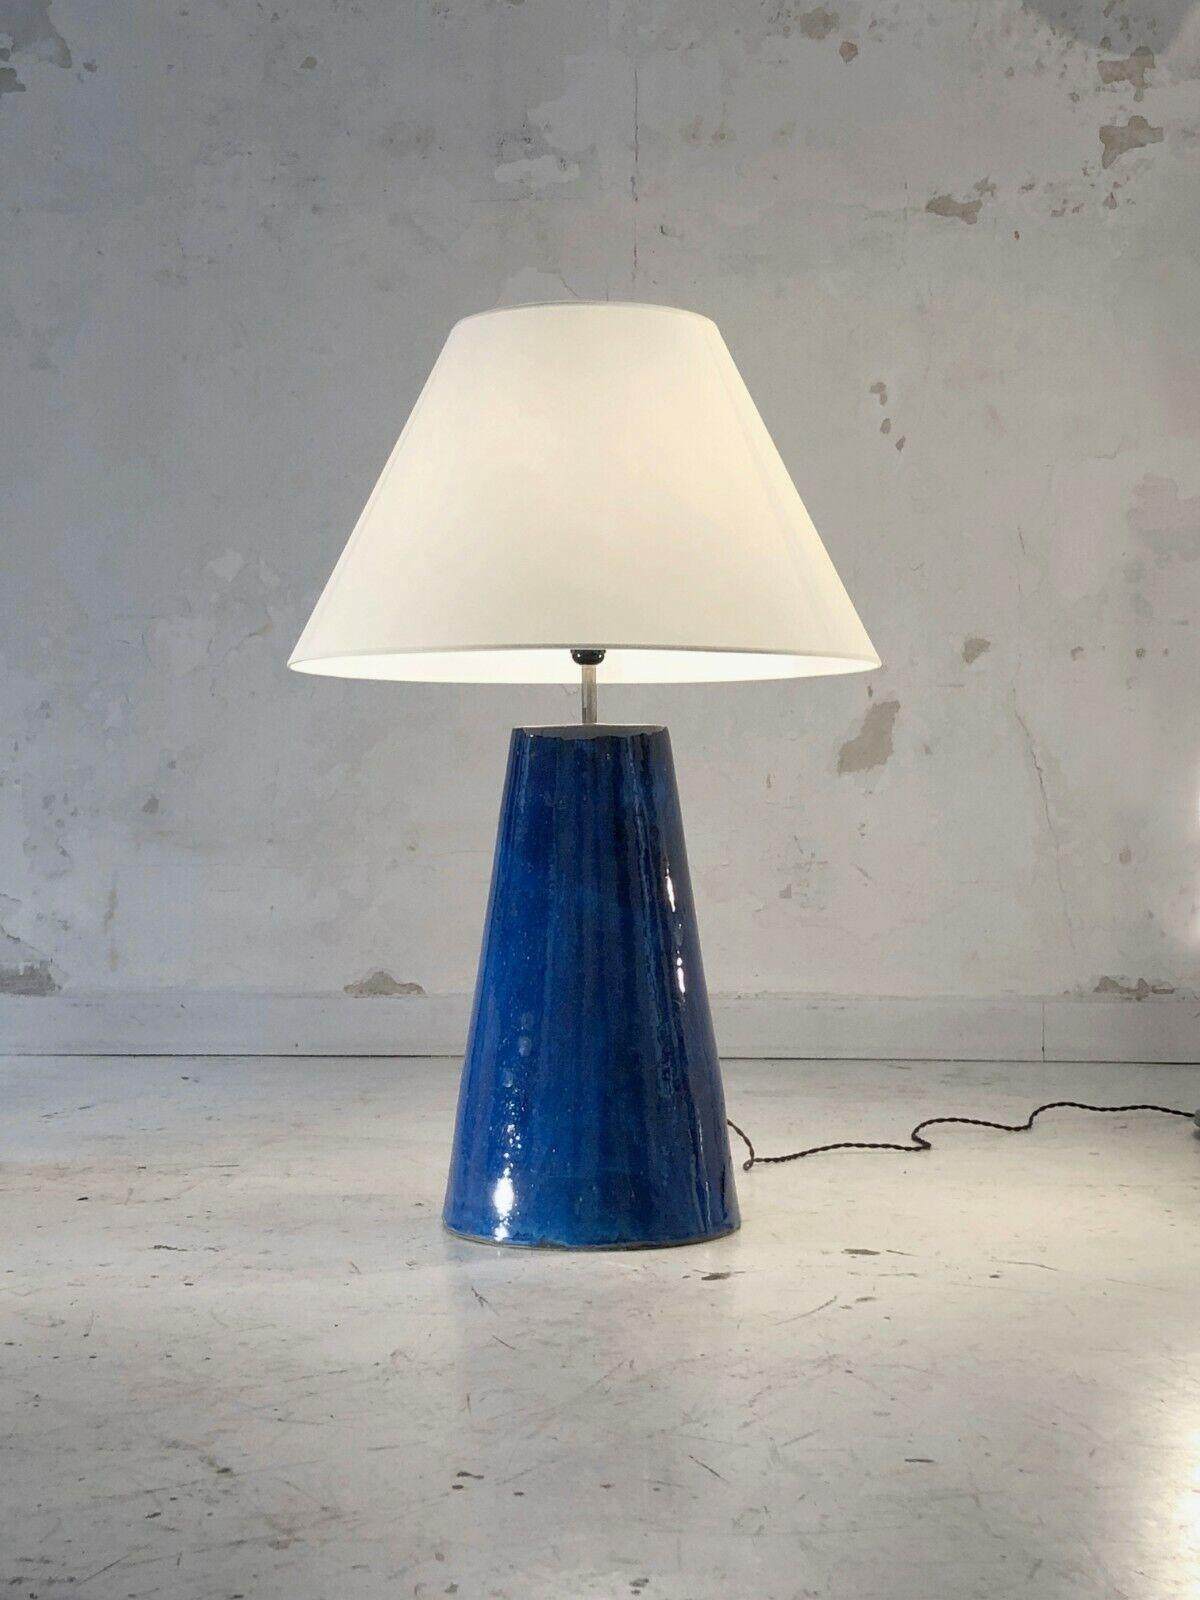 A spectacular very large conical floor or table lamp, Post-Modernist, Free-Form, Memphis, Constructivist, Bauhaus.... in thick blue enameled ceramic, topped with a large lampshade, without signature or monogram, to be attributed, France 1980.

SOLD